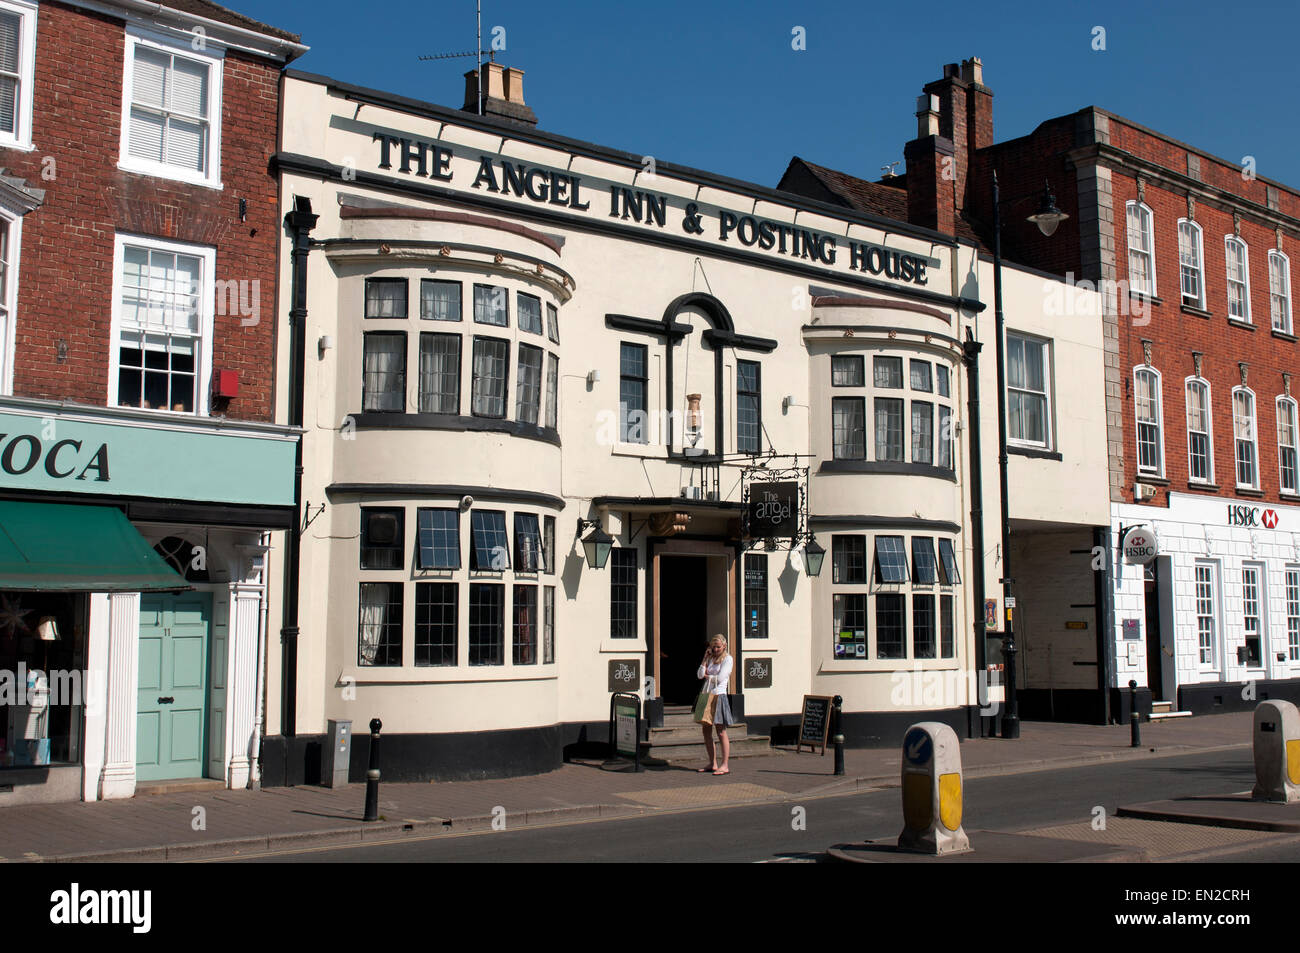 The Angel Inn and Posting House, Pershore, Worcestershire, England, UK Stock Photo